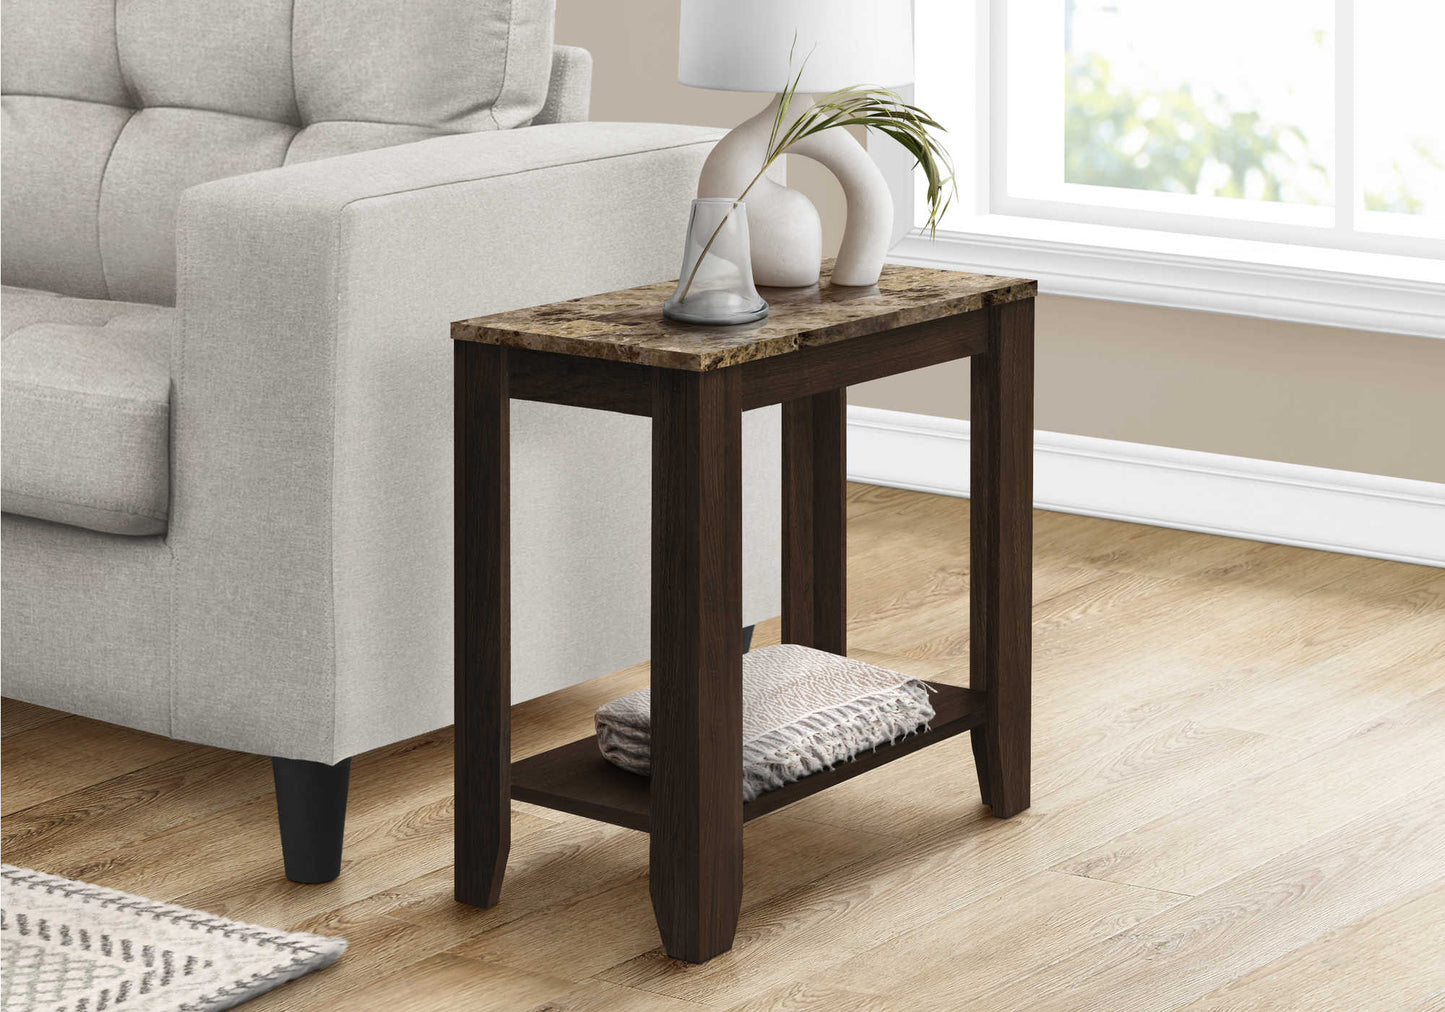 23.75” L / 21.5” H Transitional End Table with Cappuccino Marble Tabletop